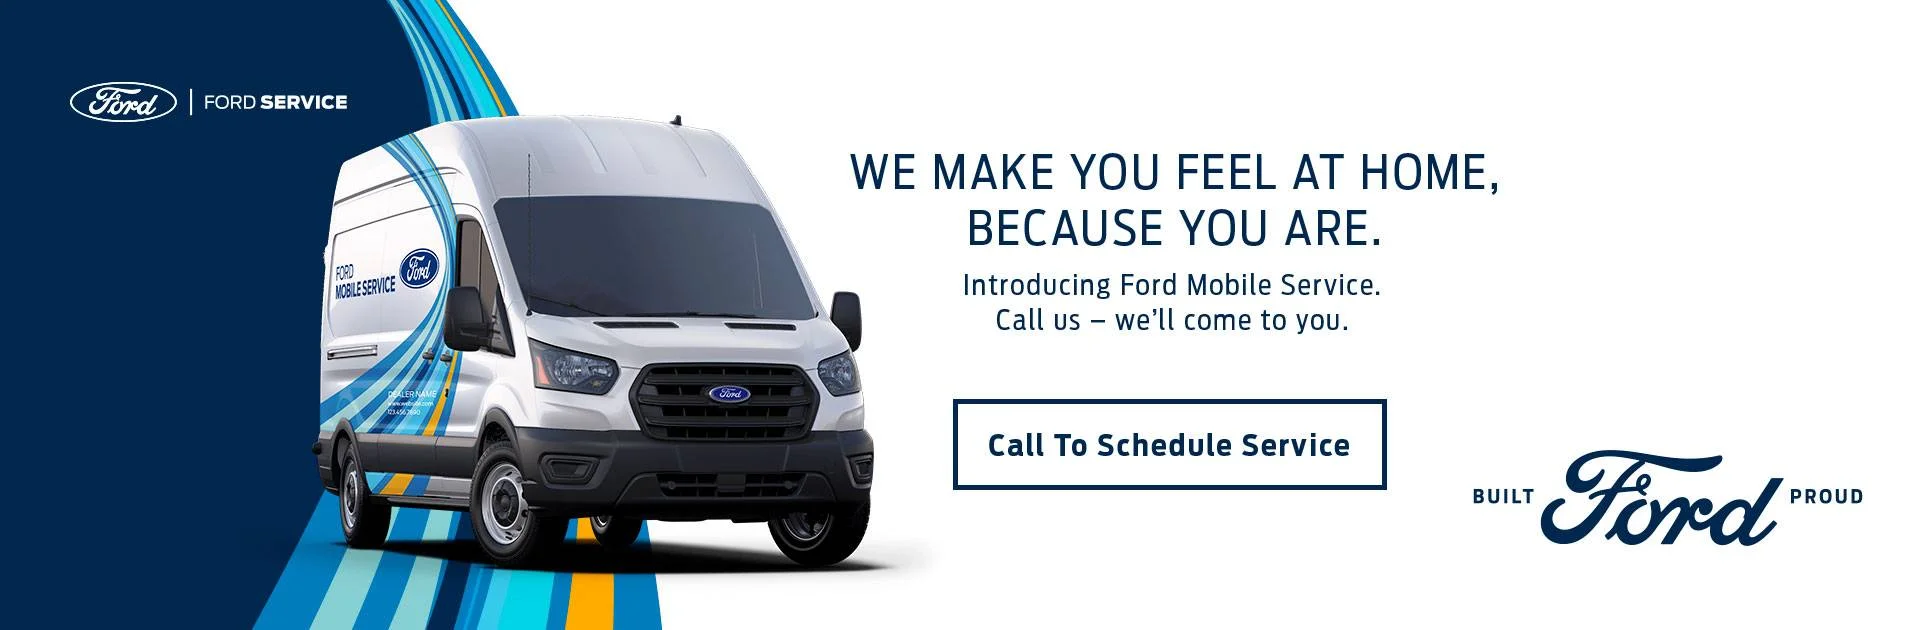 We make you feel at home, because you are. Introducing Ford Mobile Service. Call us - we'll come to you.